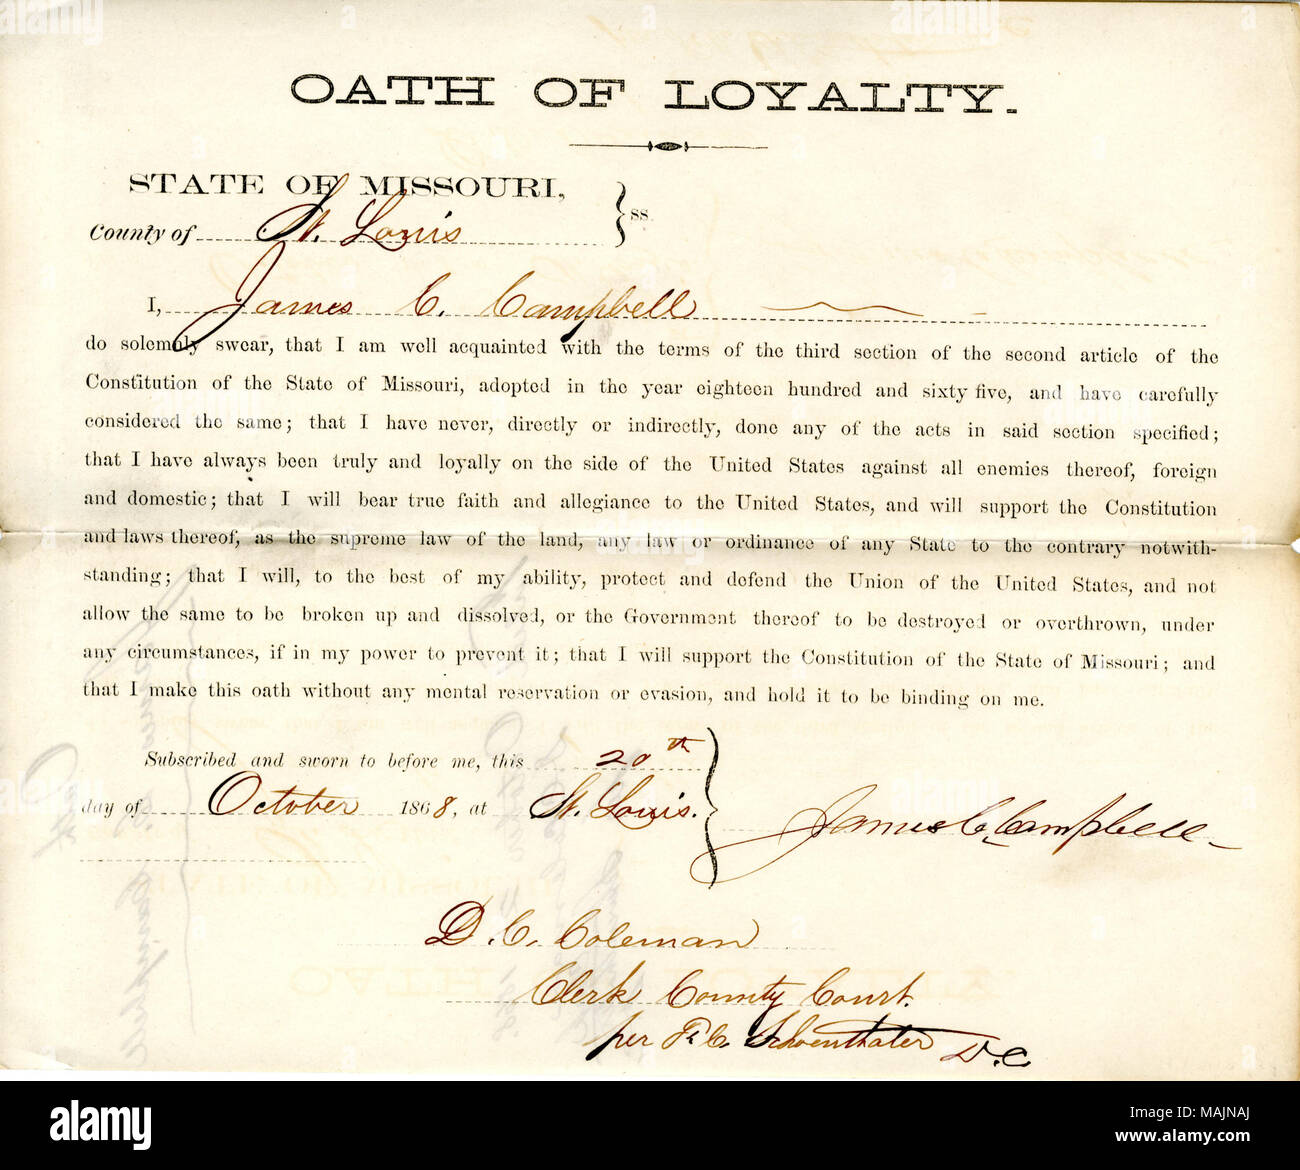 Swears oath of allegiance to the Government of the United States and the State of Missouri. Title: Loyalty oath of James C. Campbell of Missouri, County of St. Louis  . 20 October 1868. Campbell, J. Stock Photo